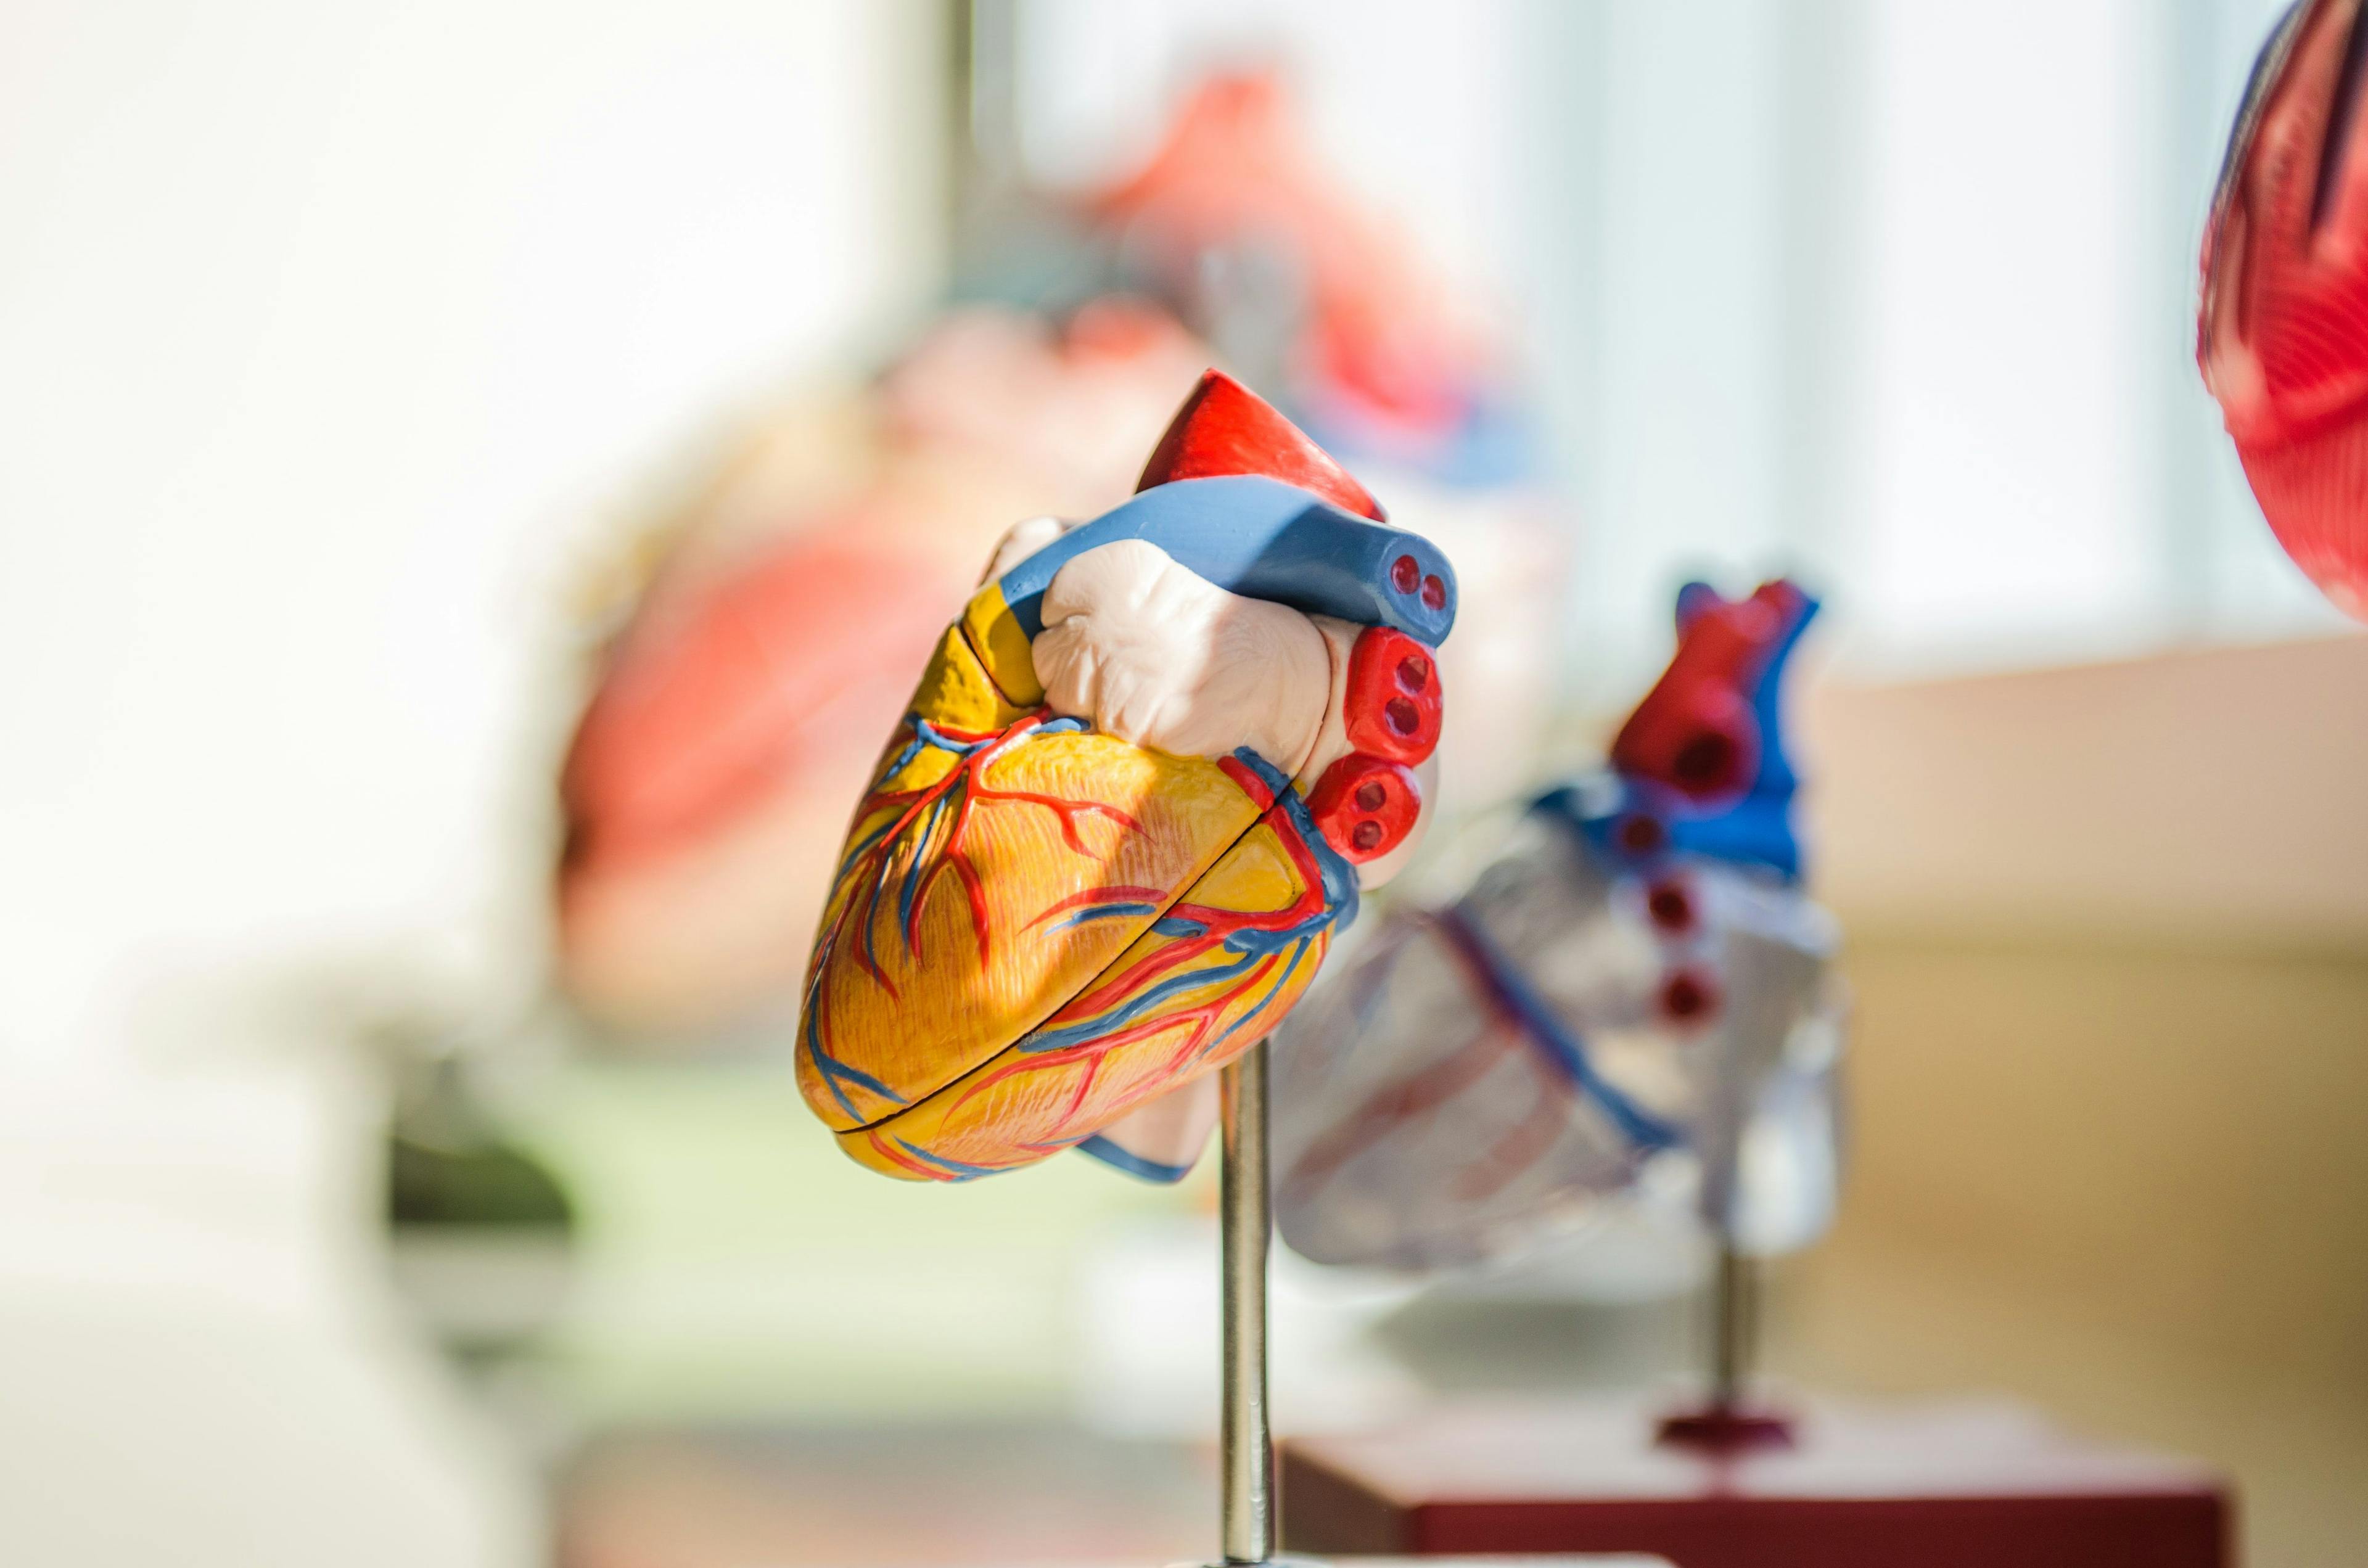 Cardiovascular Complications Likely Component of Long COVID